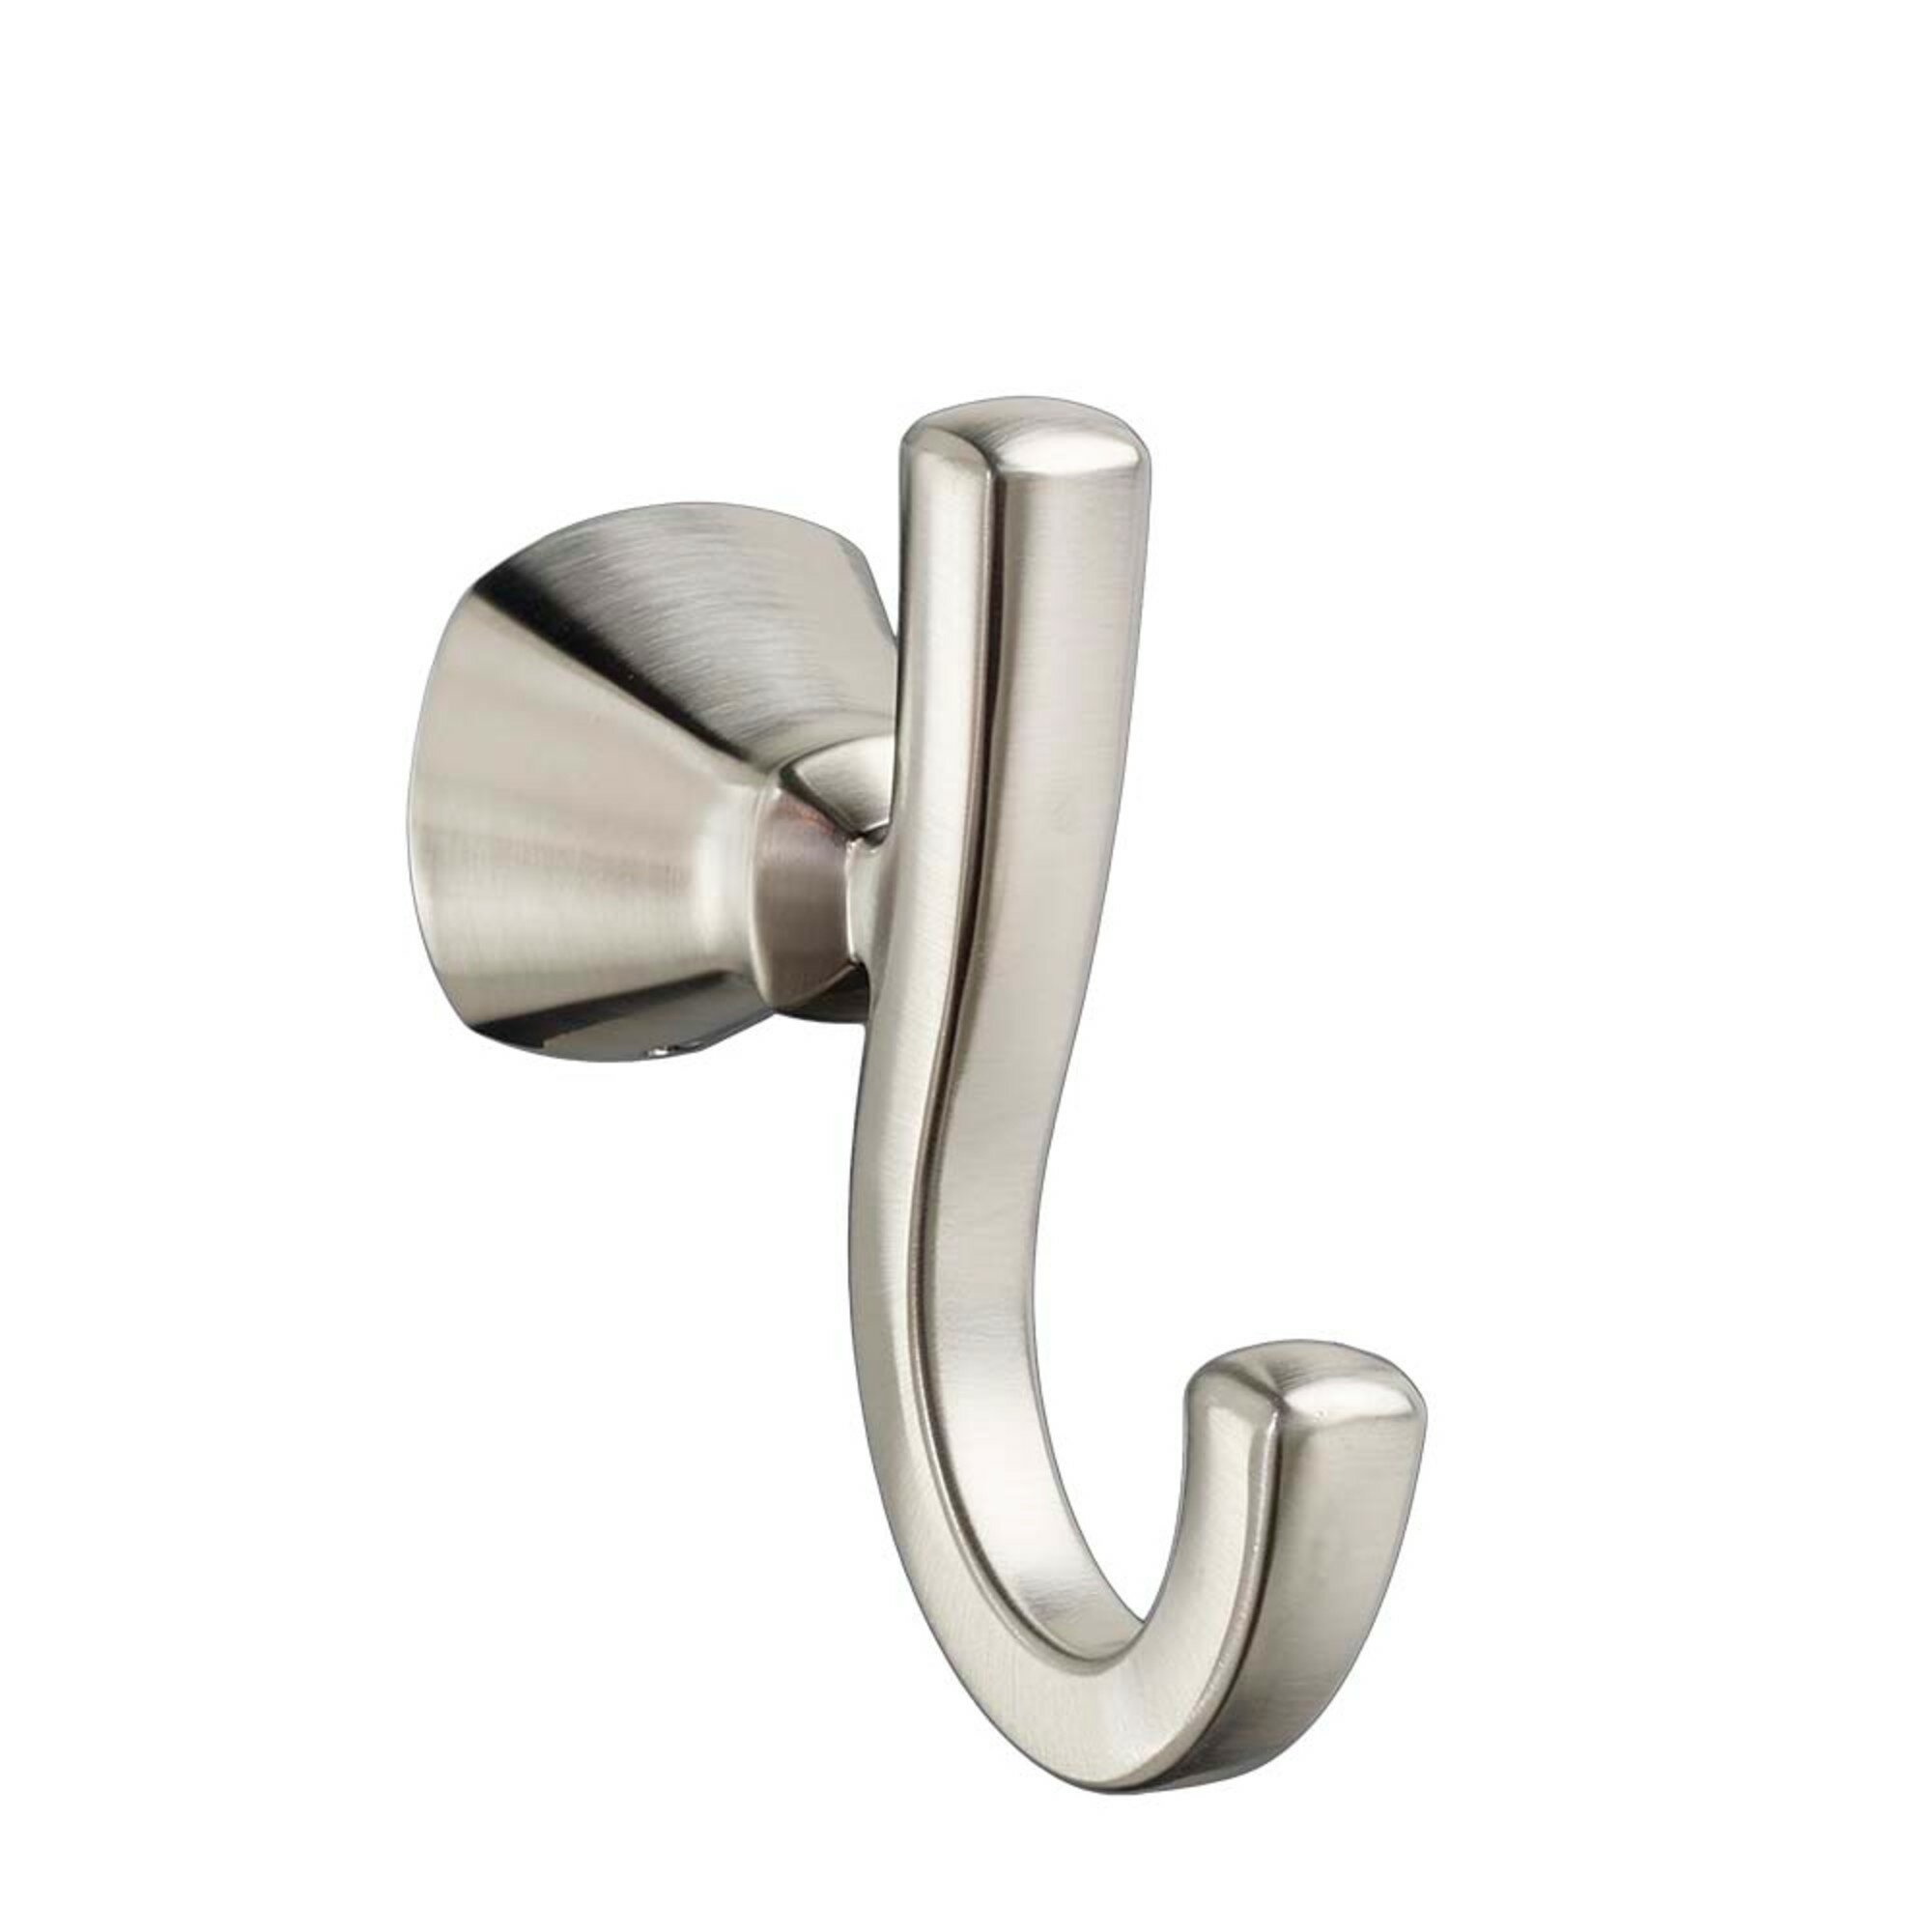 American Standard Edgemere Double Robe Hook & Reviews